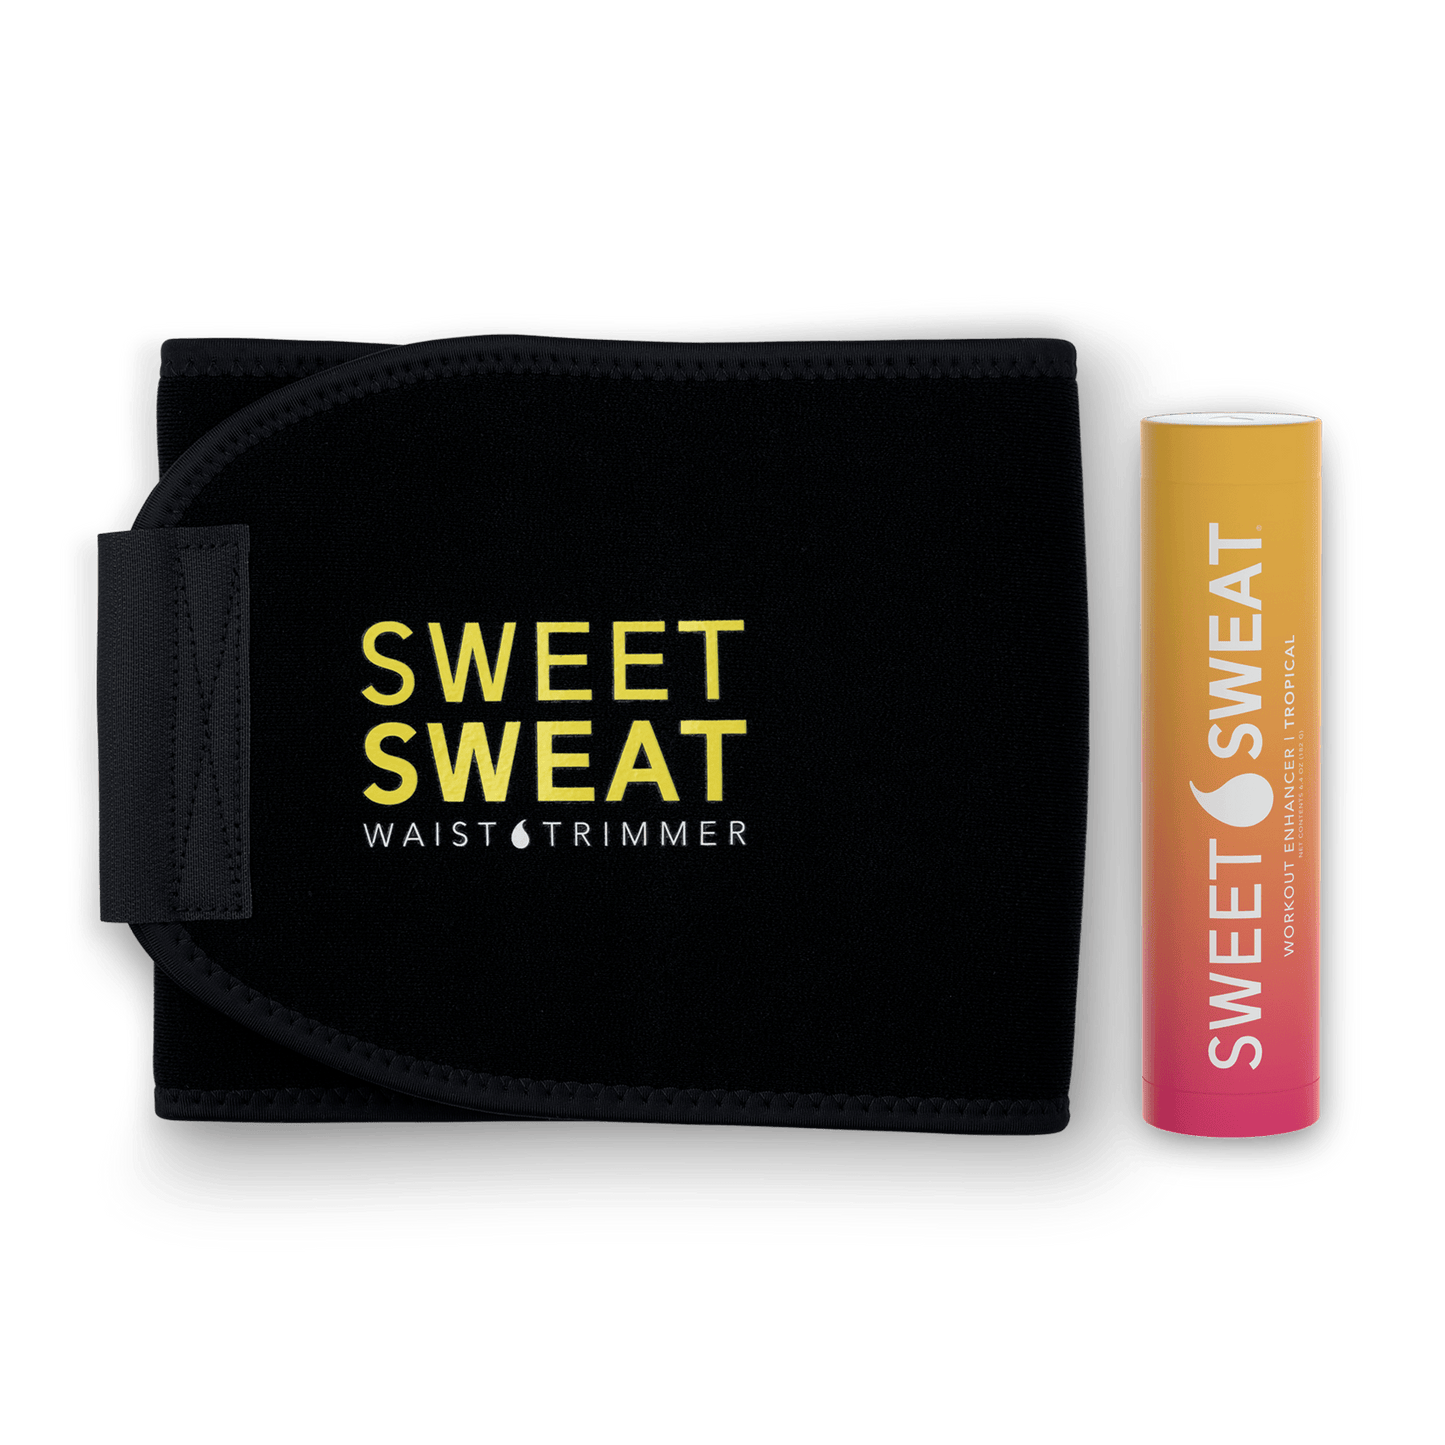 Sweet Sweat Bundle with Trimmer & Sweet Sweat Stick from the brand Sweet Sweat.